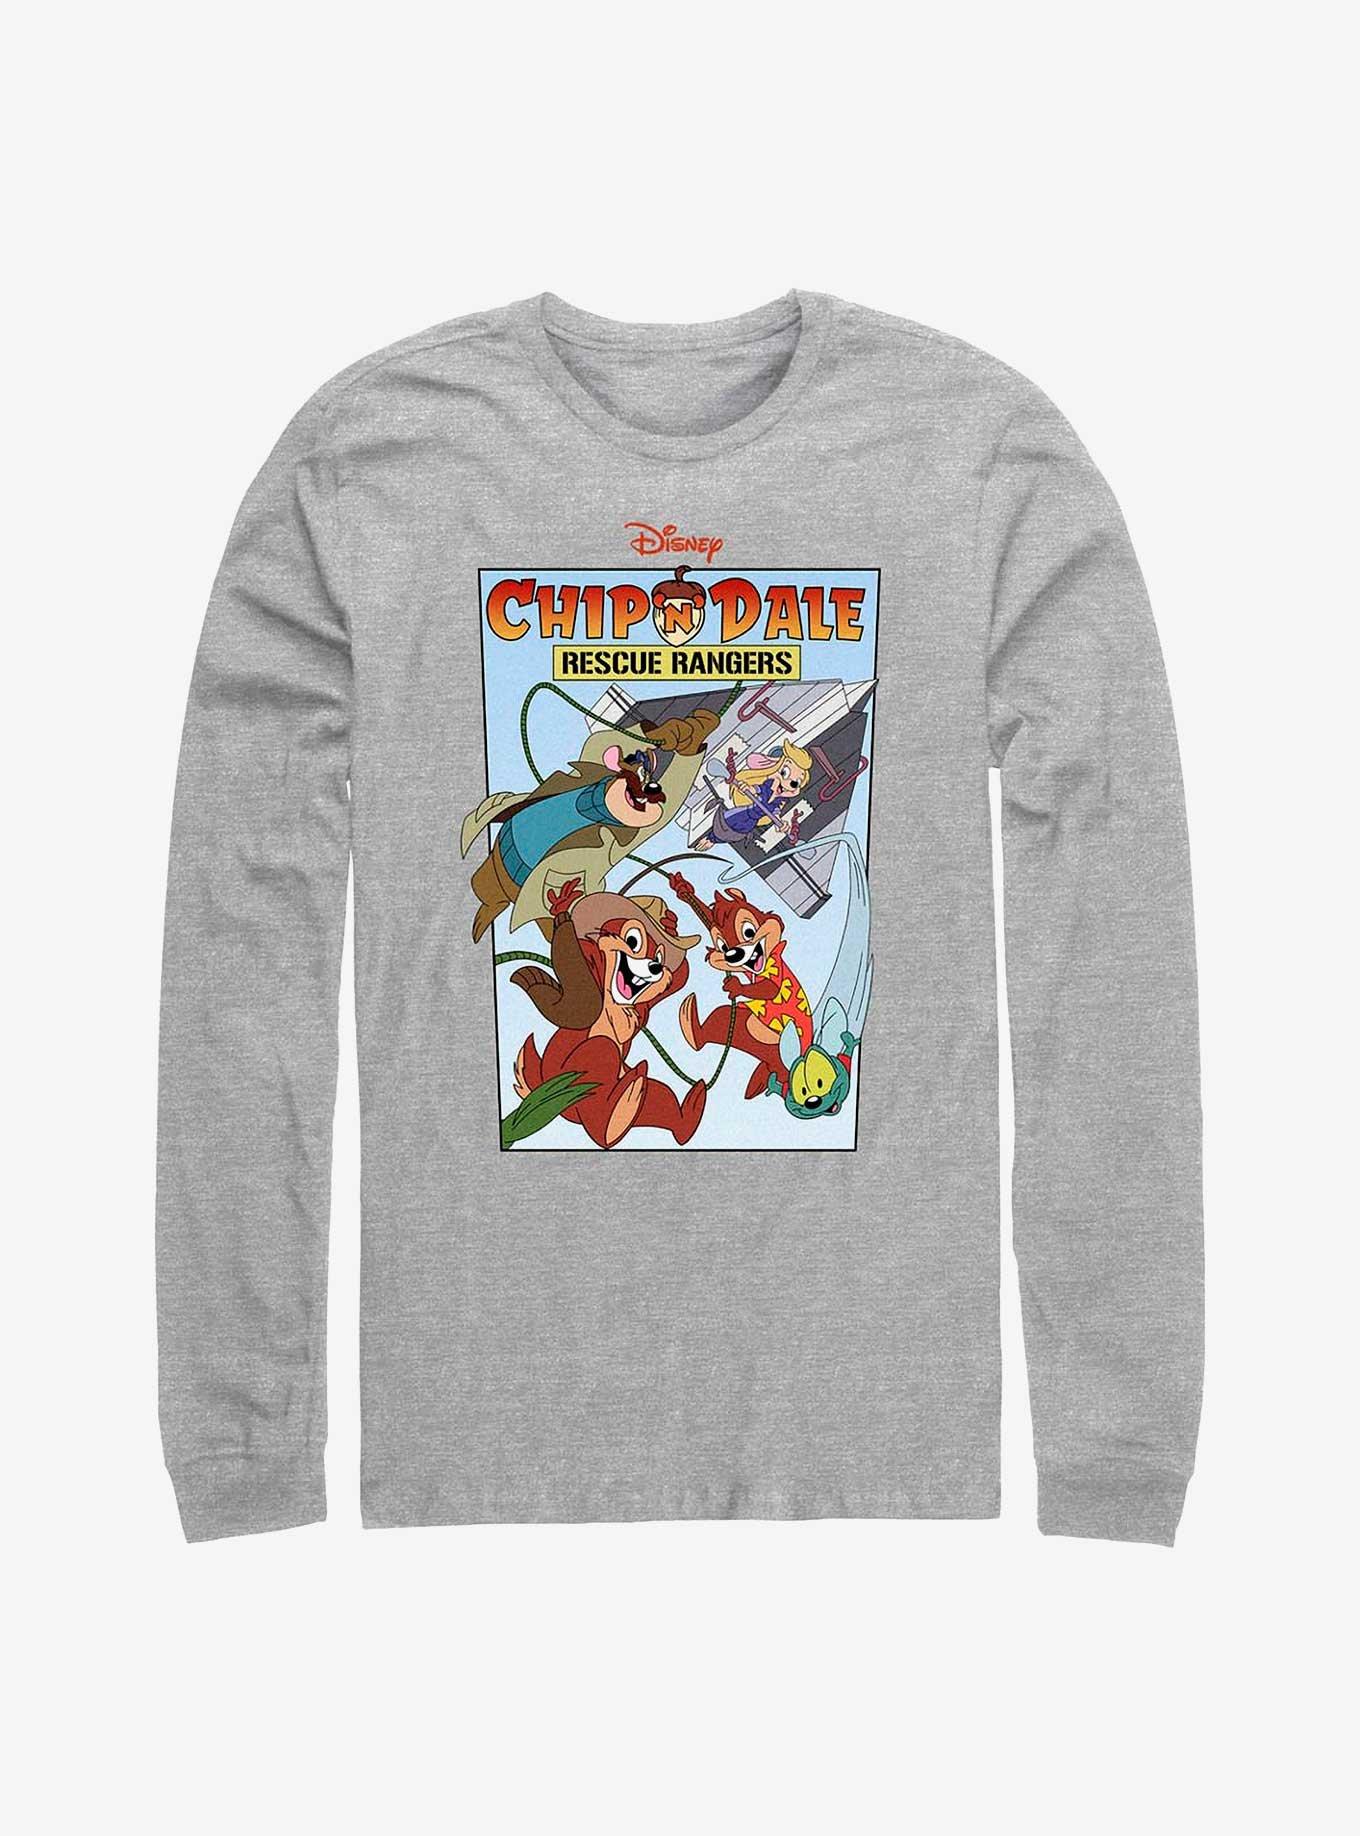 Disney Chip 'n Dale: Rescue Rangers Cover Long-Sleeve T-Shirt